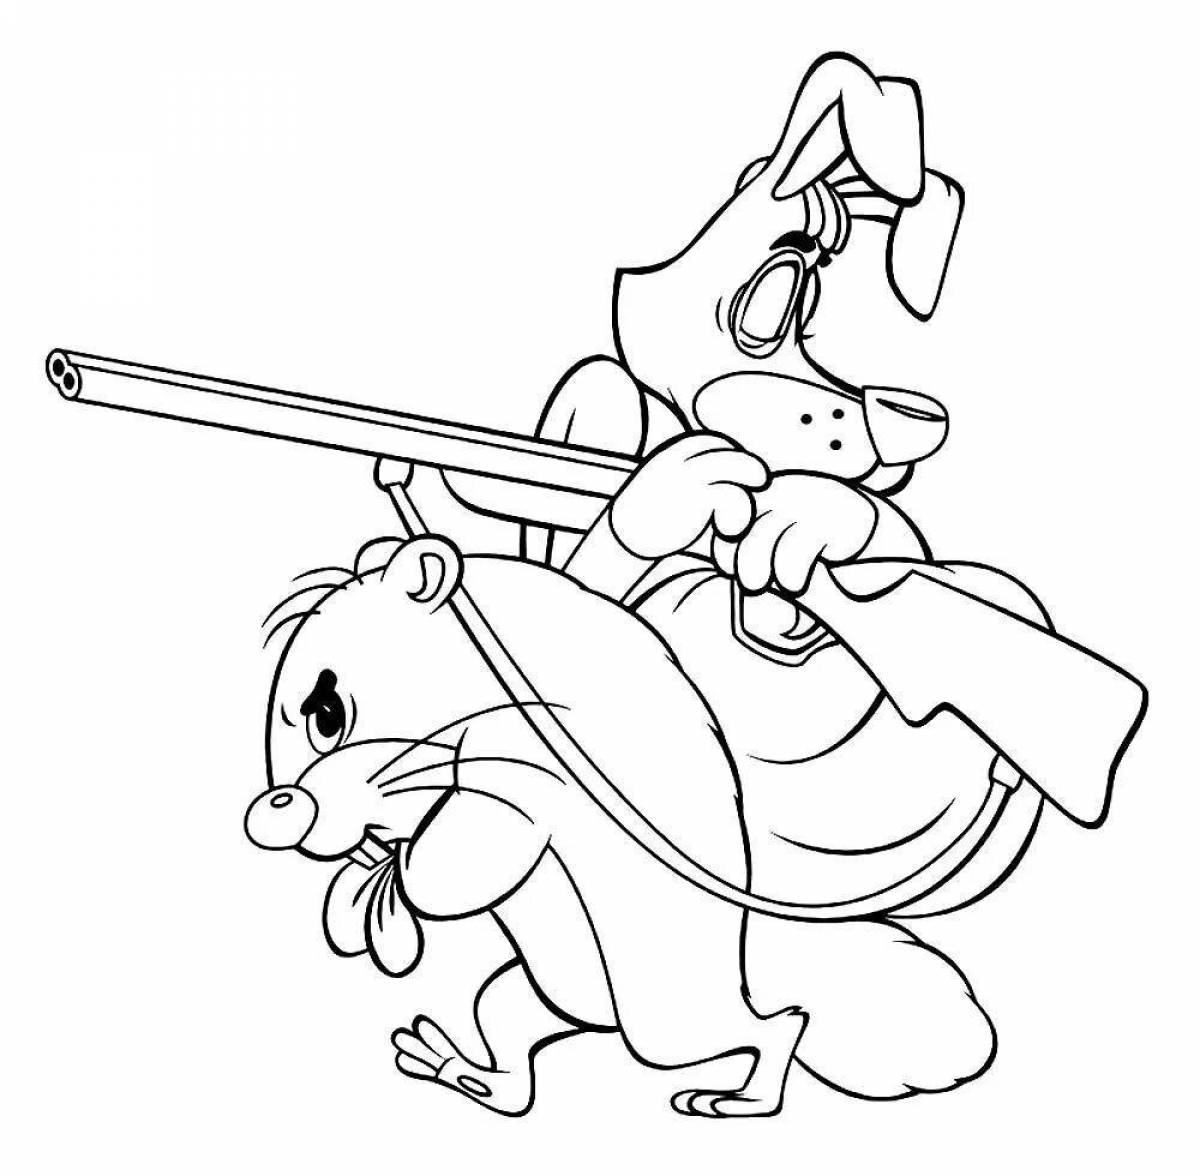 Fairy hunters and rabbits coloring page